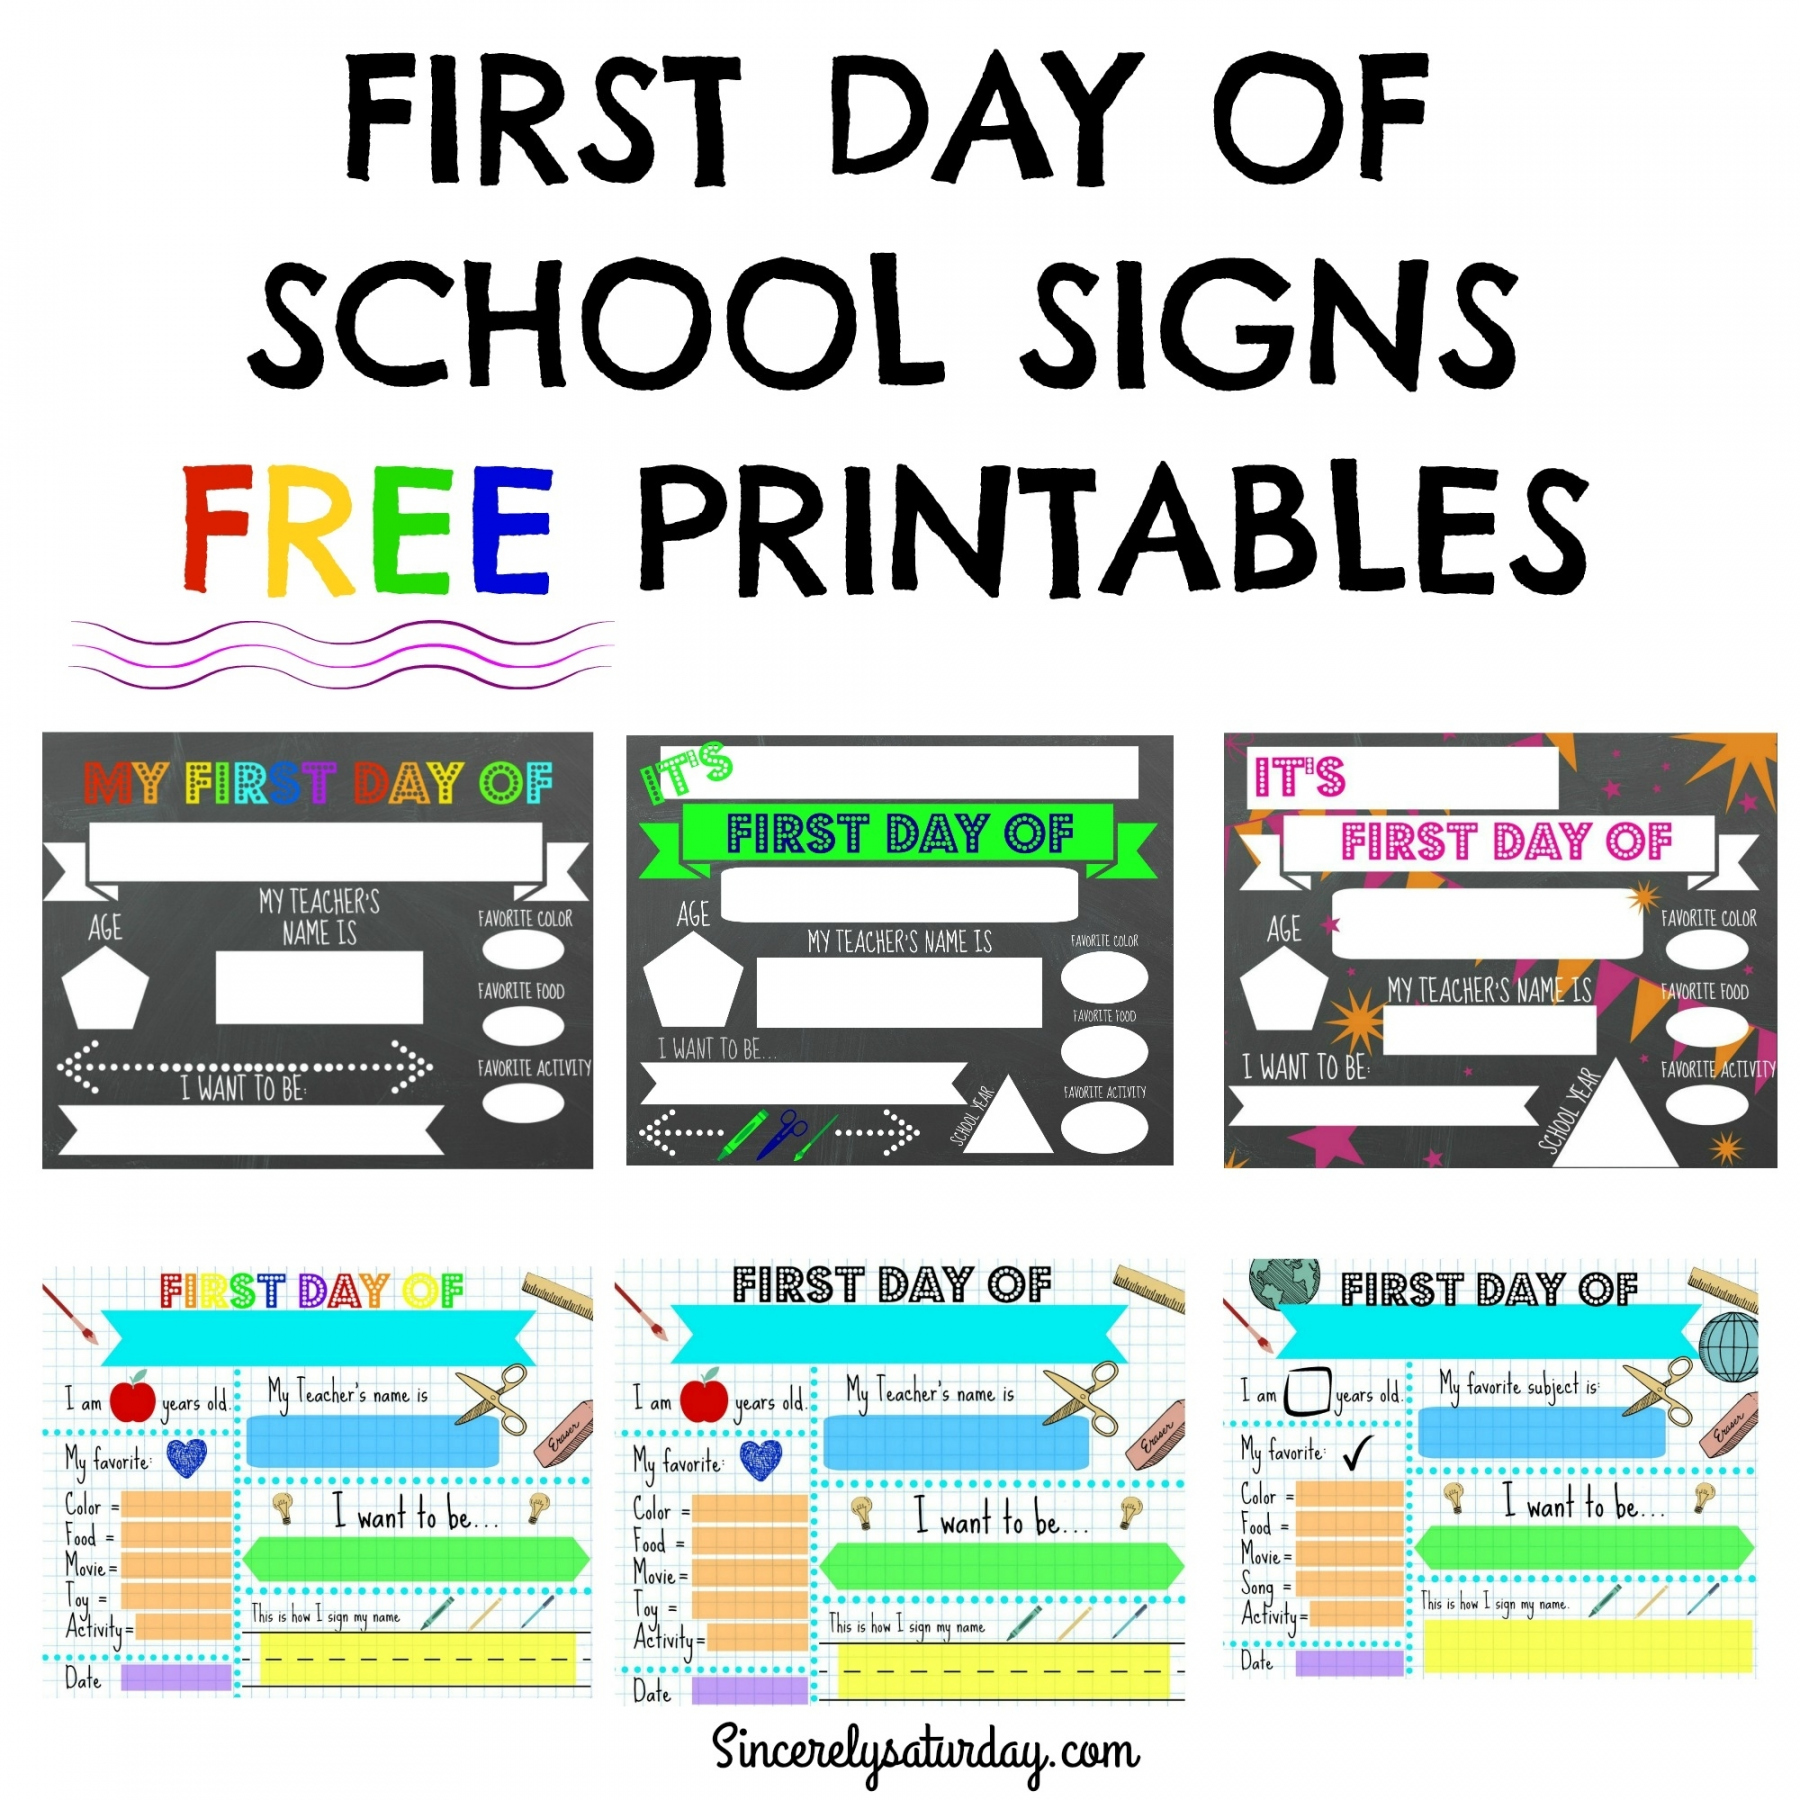 FREE PRINTABLE FIRST DAY OF SCHOOL SIGNS - Sincerely Saturday - FREE Printables - First Day Of School Sign Free Printable